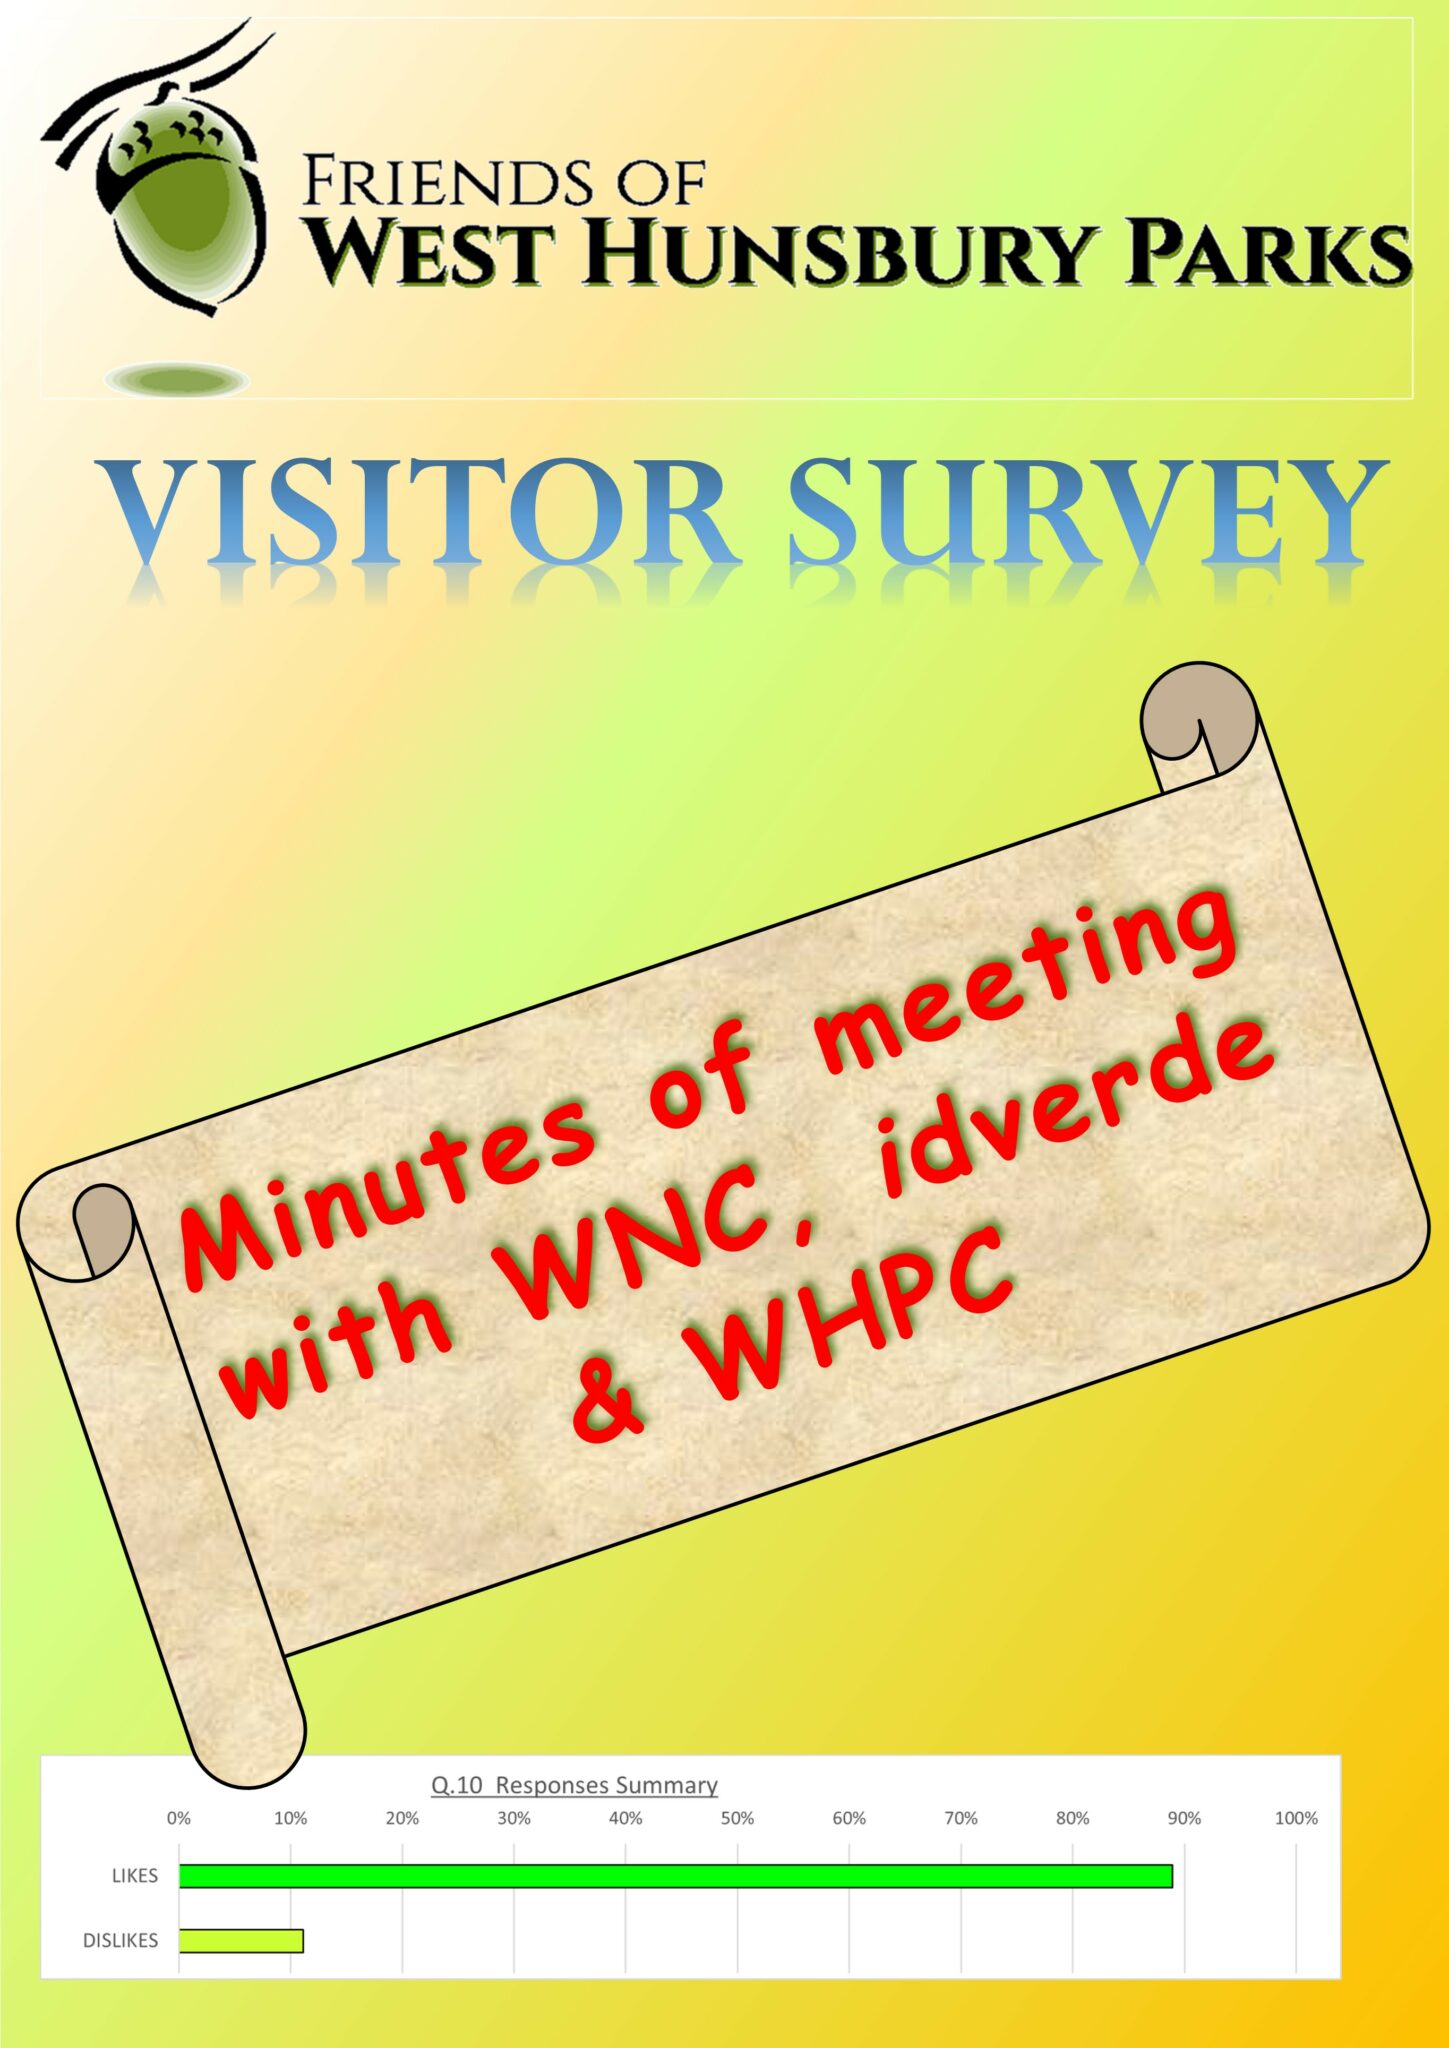 Visitor Survey Minutes of Meeting with WNC, idverde & WHPC